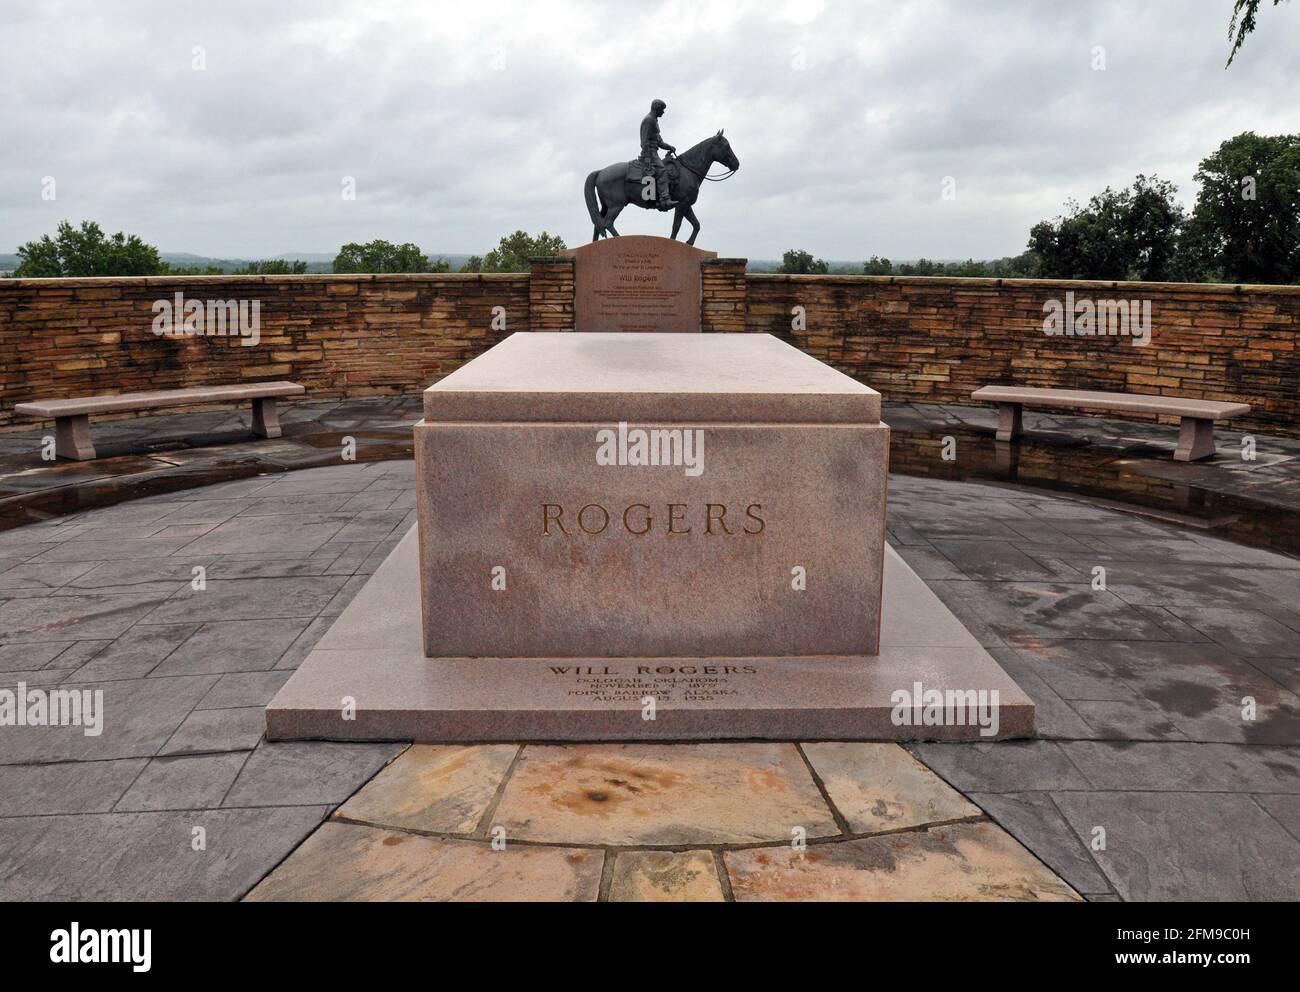 Tomb of American entertainer and writer Will Rogers at the Will Rogers Memorial Museum in Claremore, Oklahoma. Rogers died in a plane crash in 1935. Stock Photo